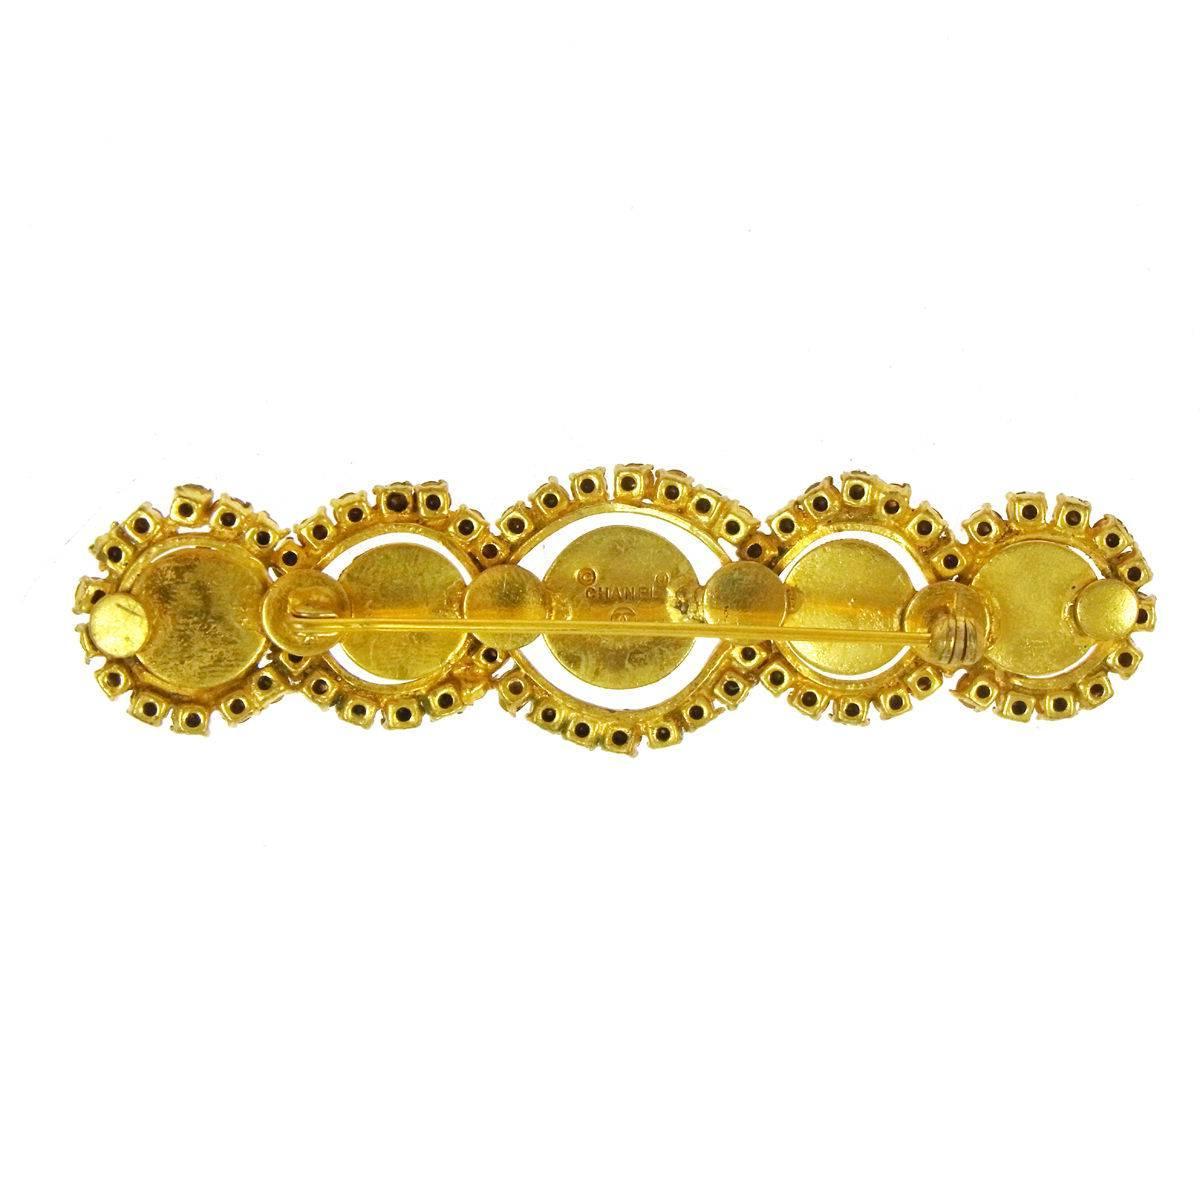 CURATOR'S NOTES

Metal
Gold tone hardware
Faux pearl
Rhinestone
Pin closure
Made in France
Width 1